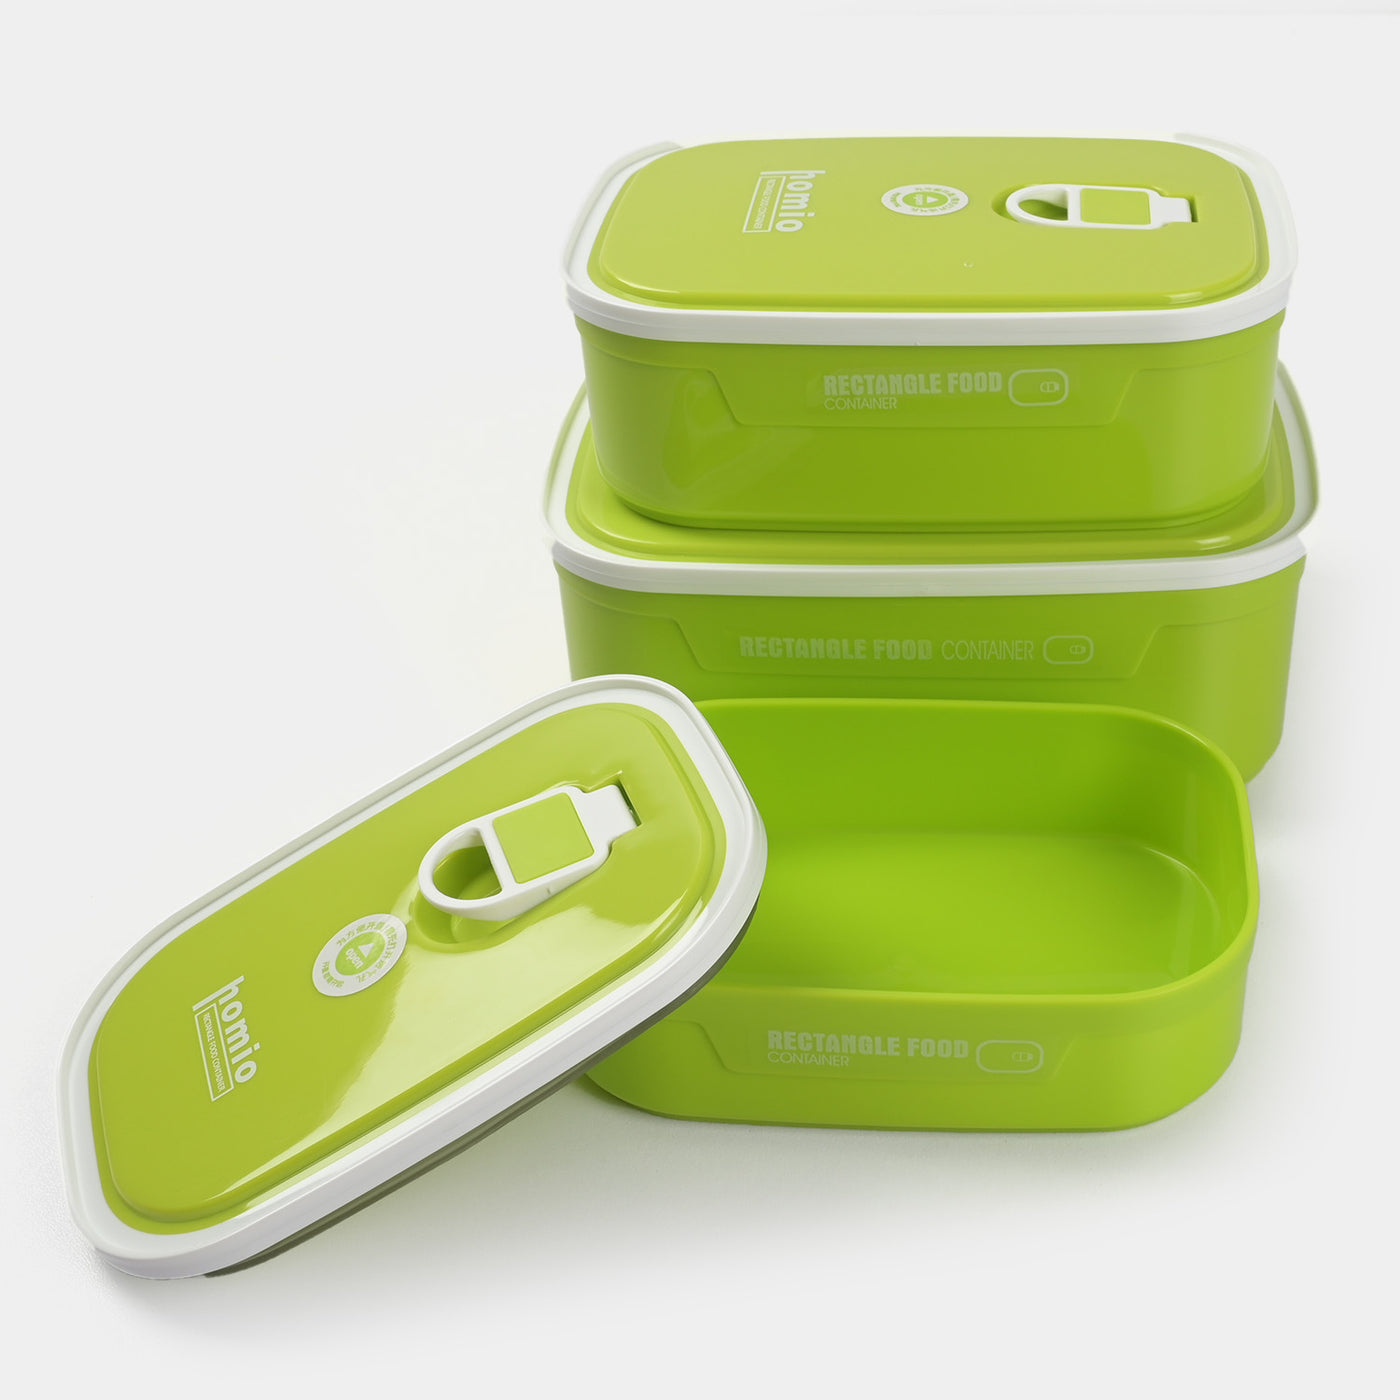 3 In 1 Plastic Food Lunch Box - Green